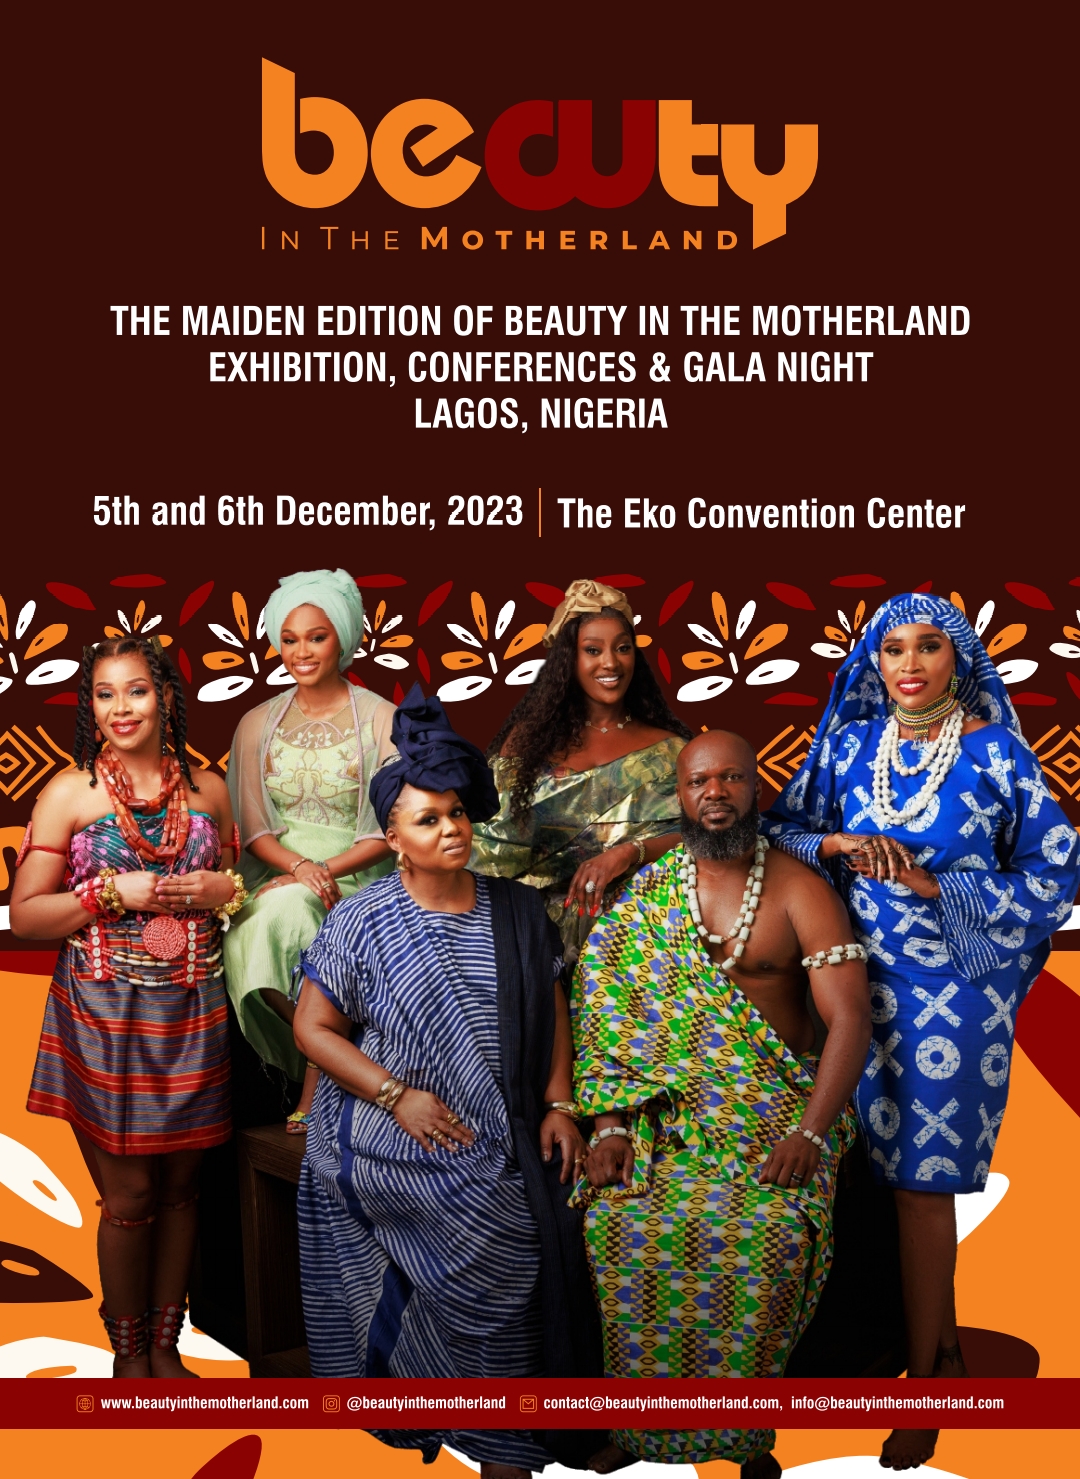 Beauty In The Motherland: A Grand Spectacle of Innovation and Talent, December 5th-6th